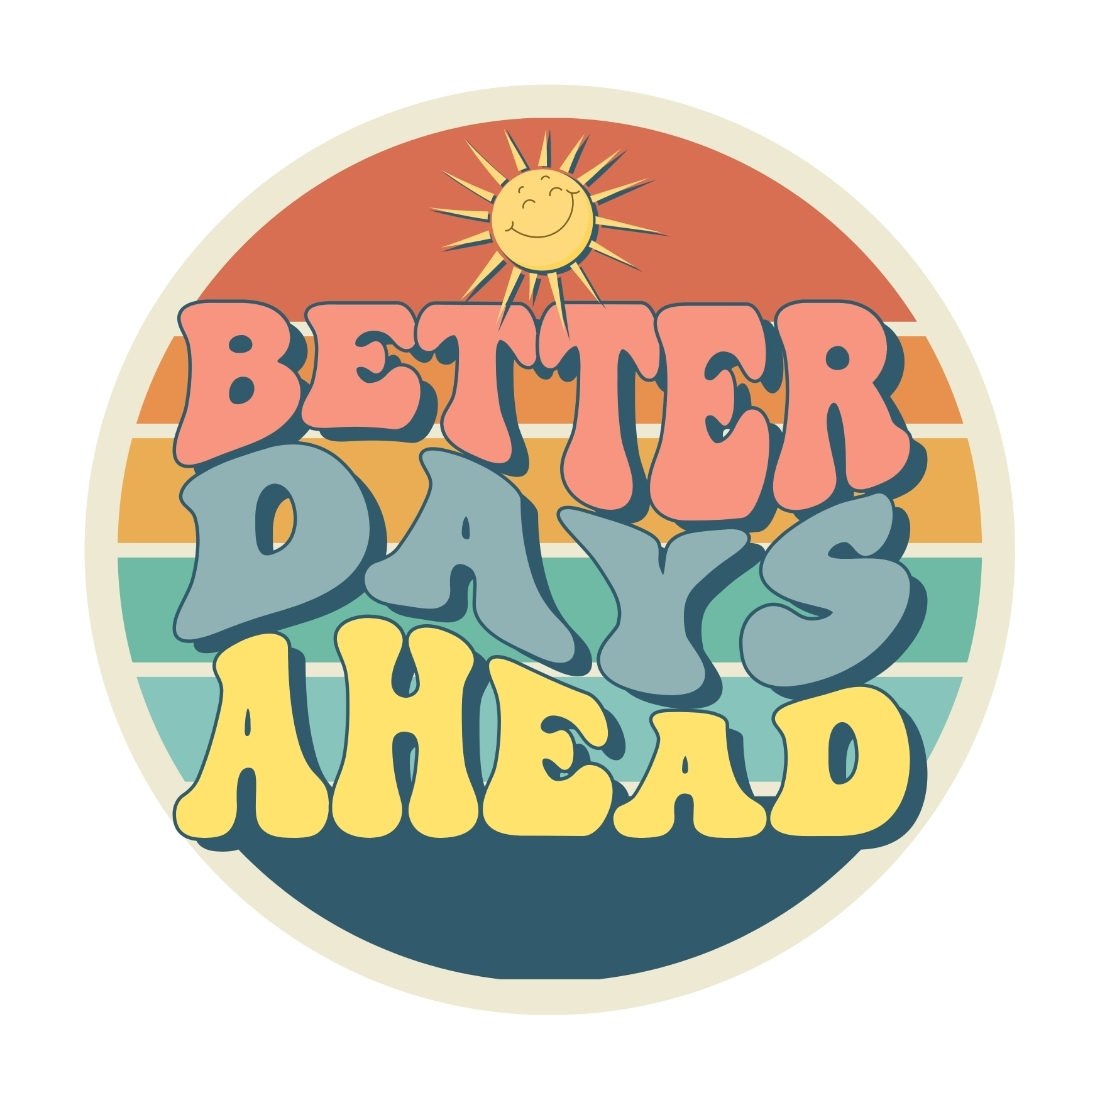 Better Days Ahead Design SVG, PNG cover image.